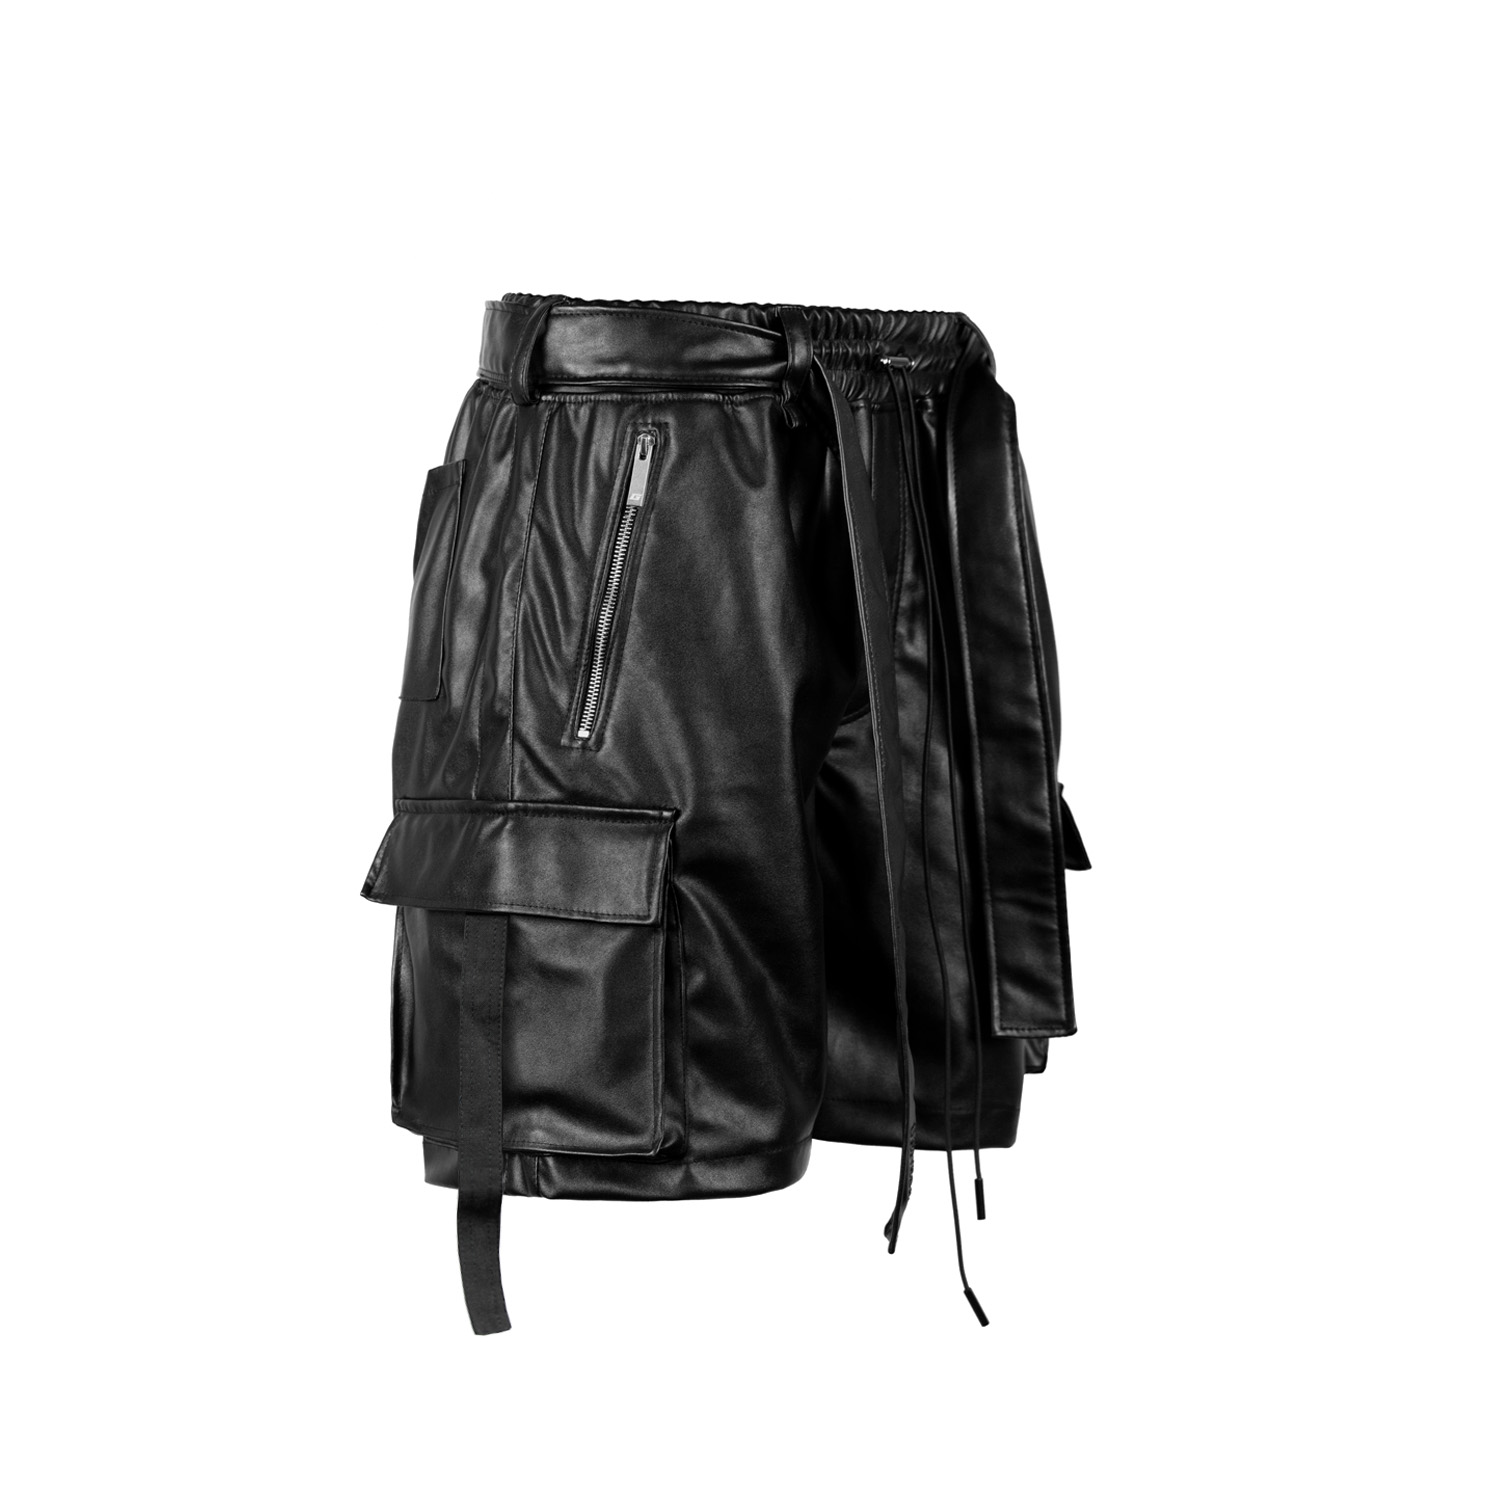 leather_black_panther_shorts_1500x1500_03